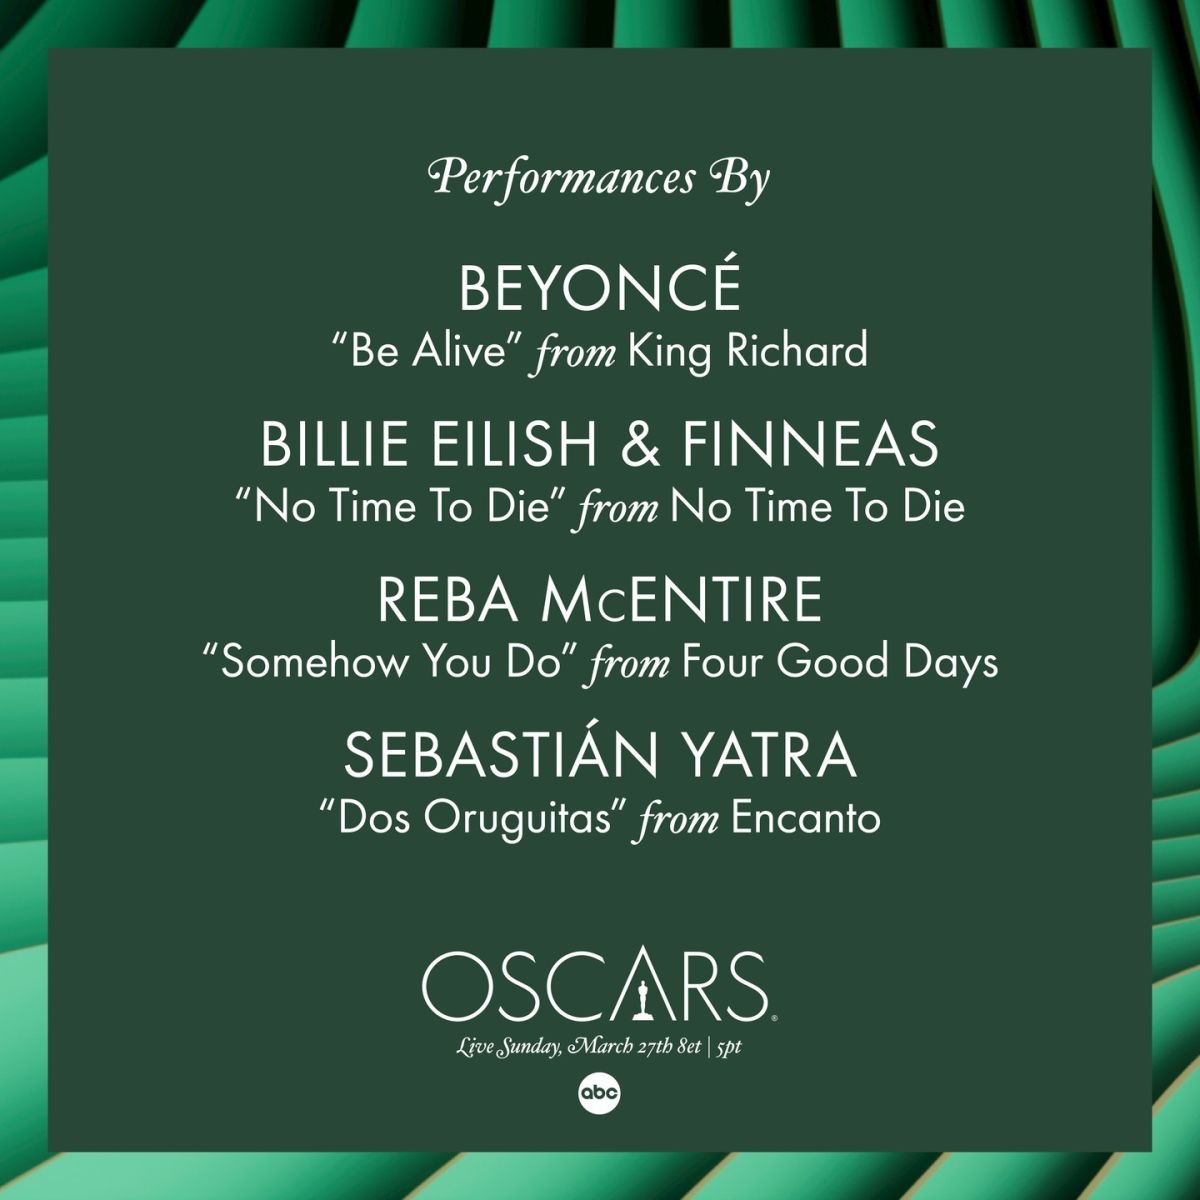 Beyonce, Billie Eilish, Finneas, &Amp; Reba Mcentire All Confirmed To Perform At The 2022 Oscars 2